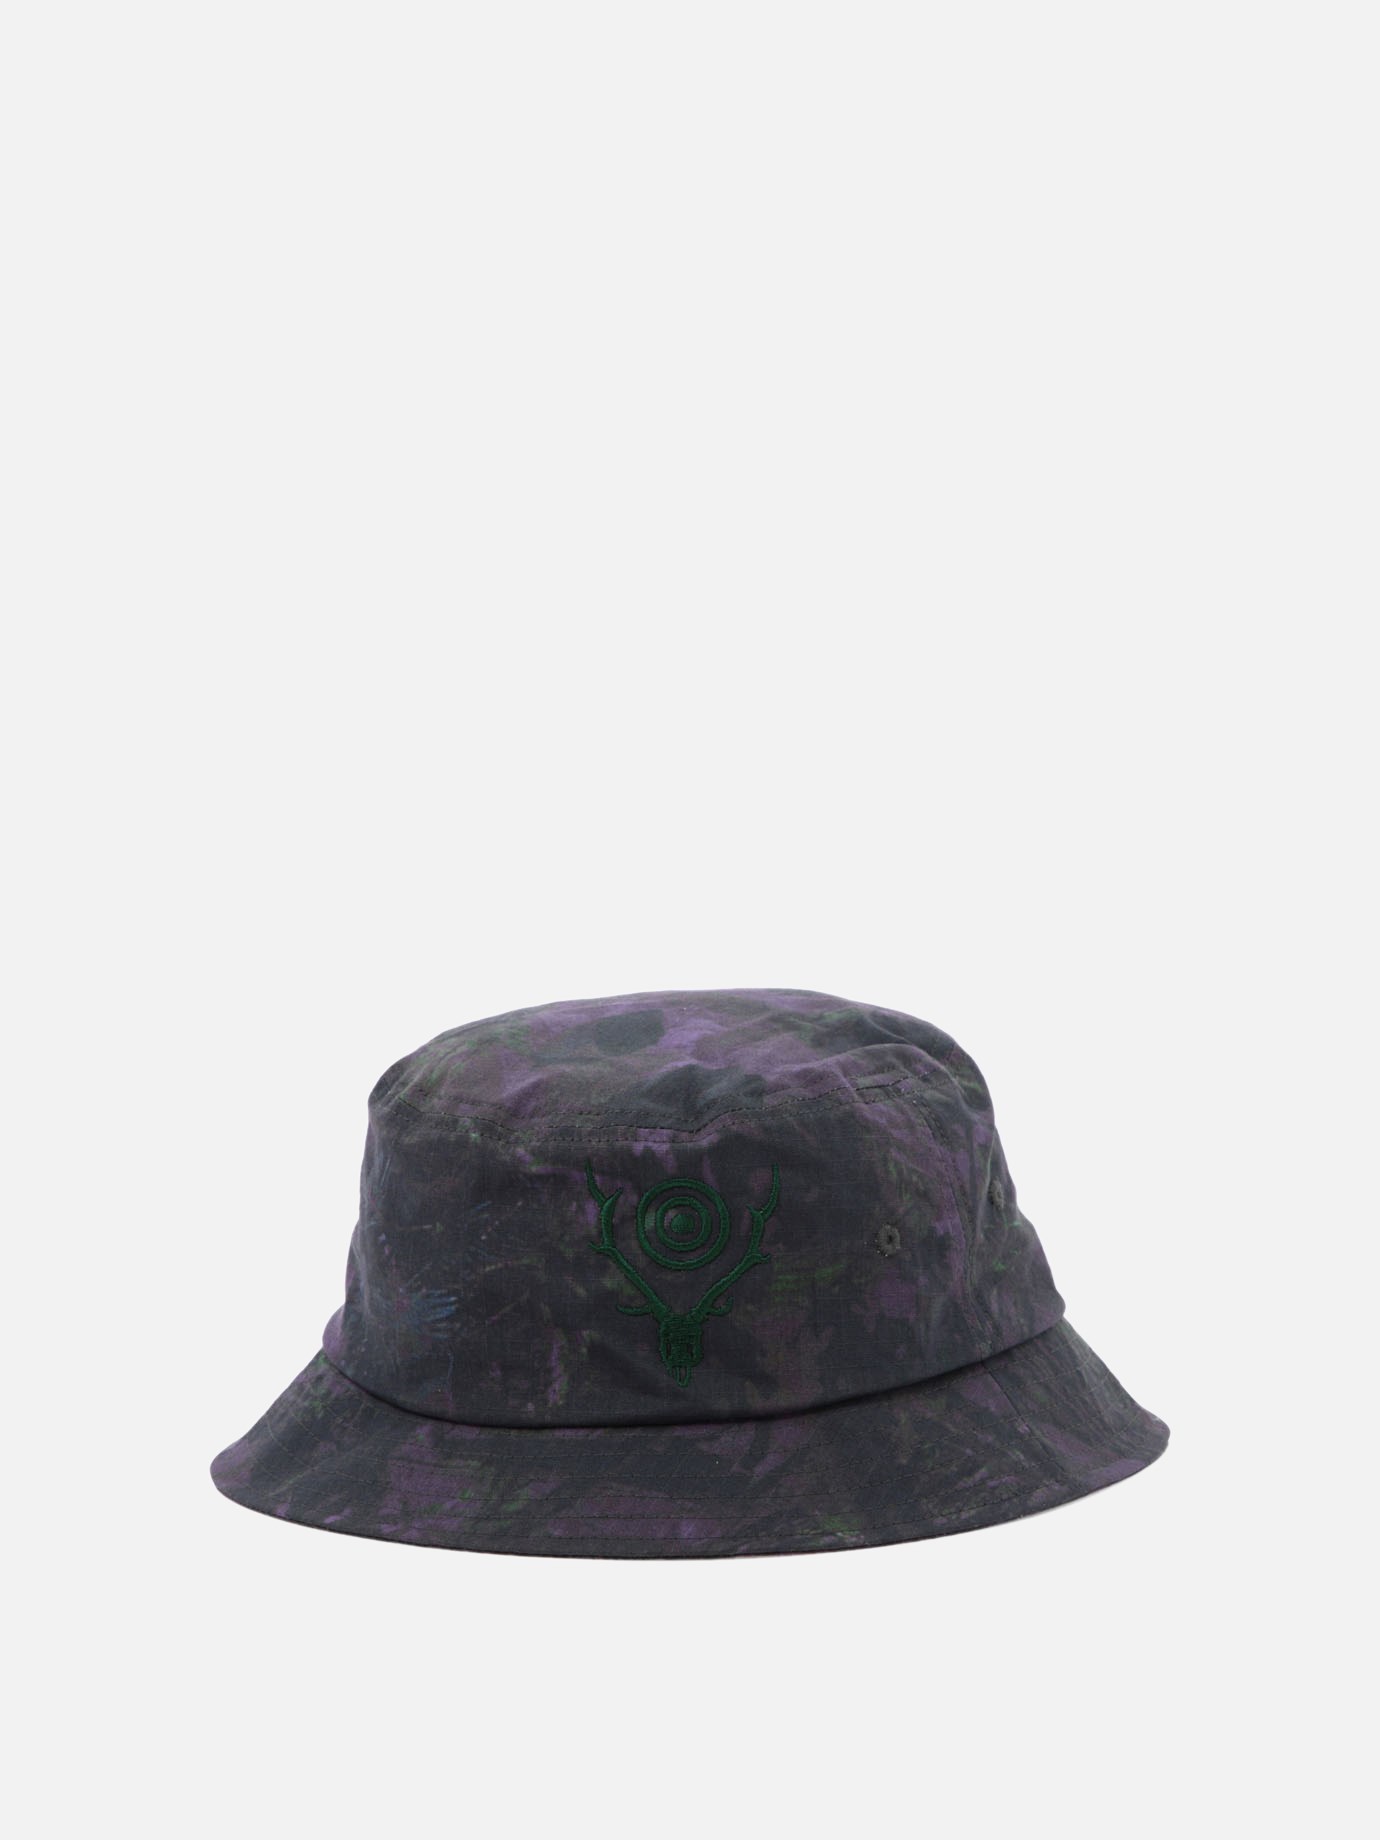 Bucket hat with embroidery